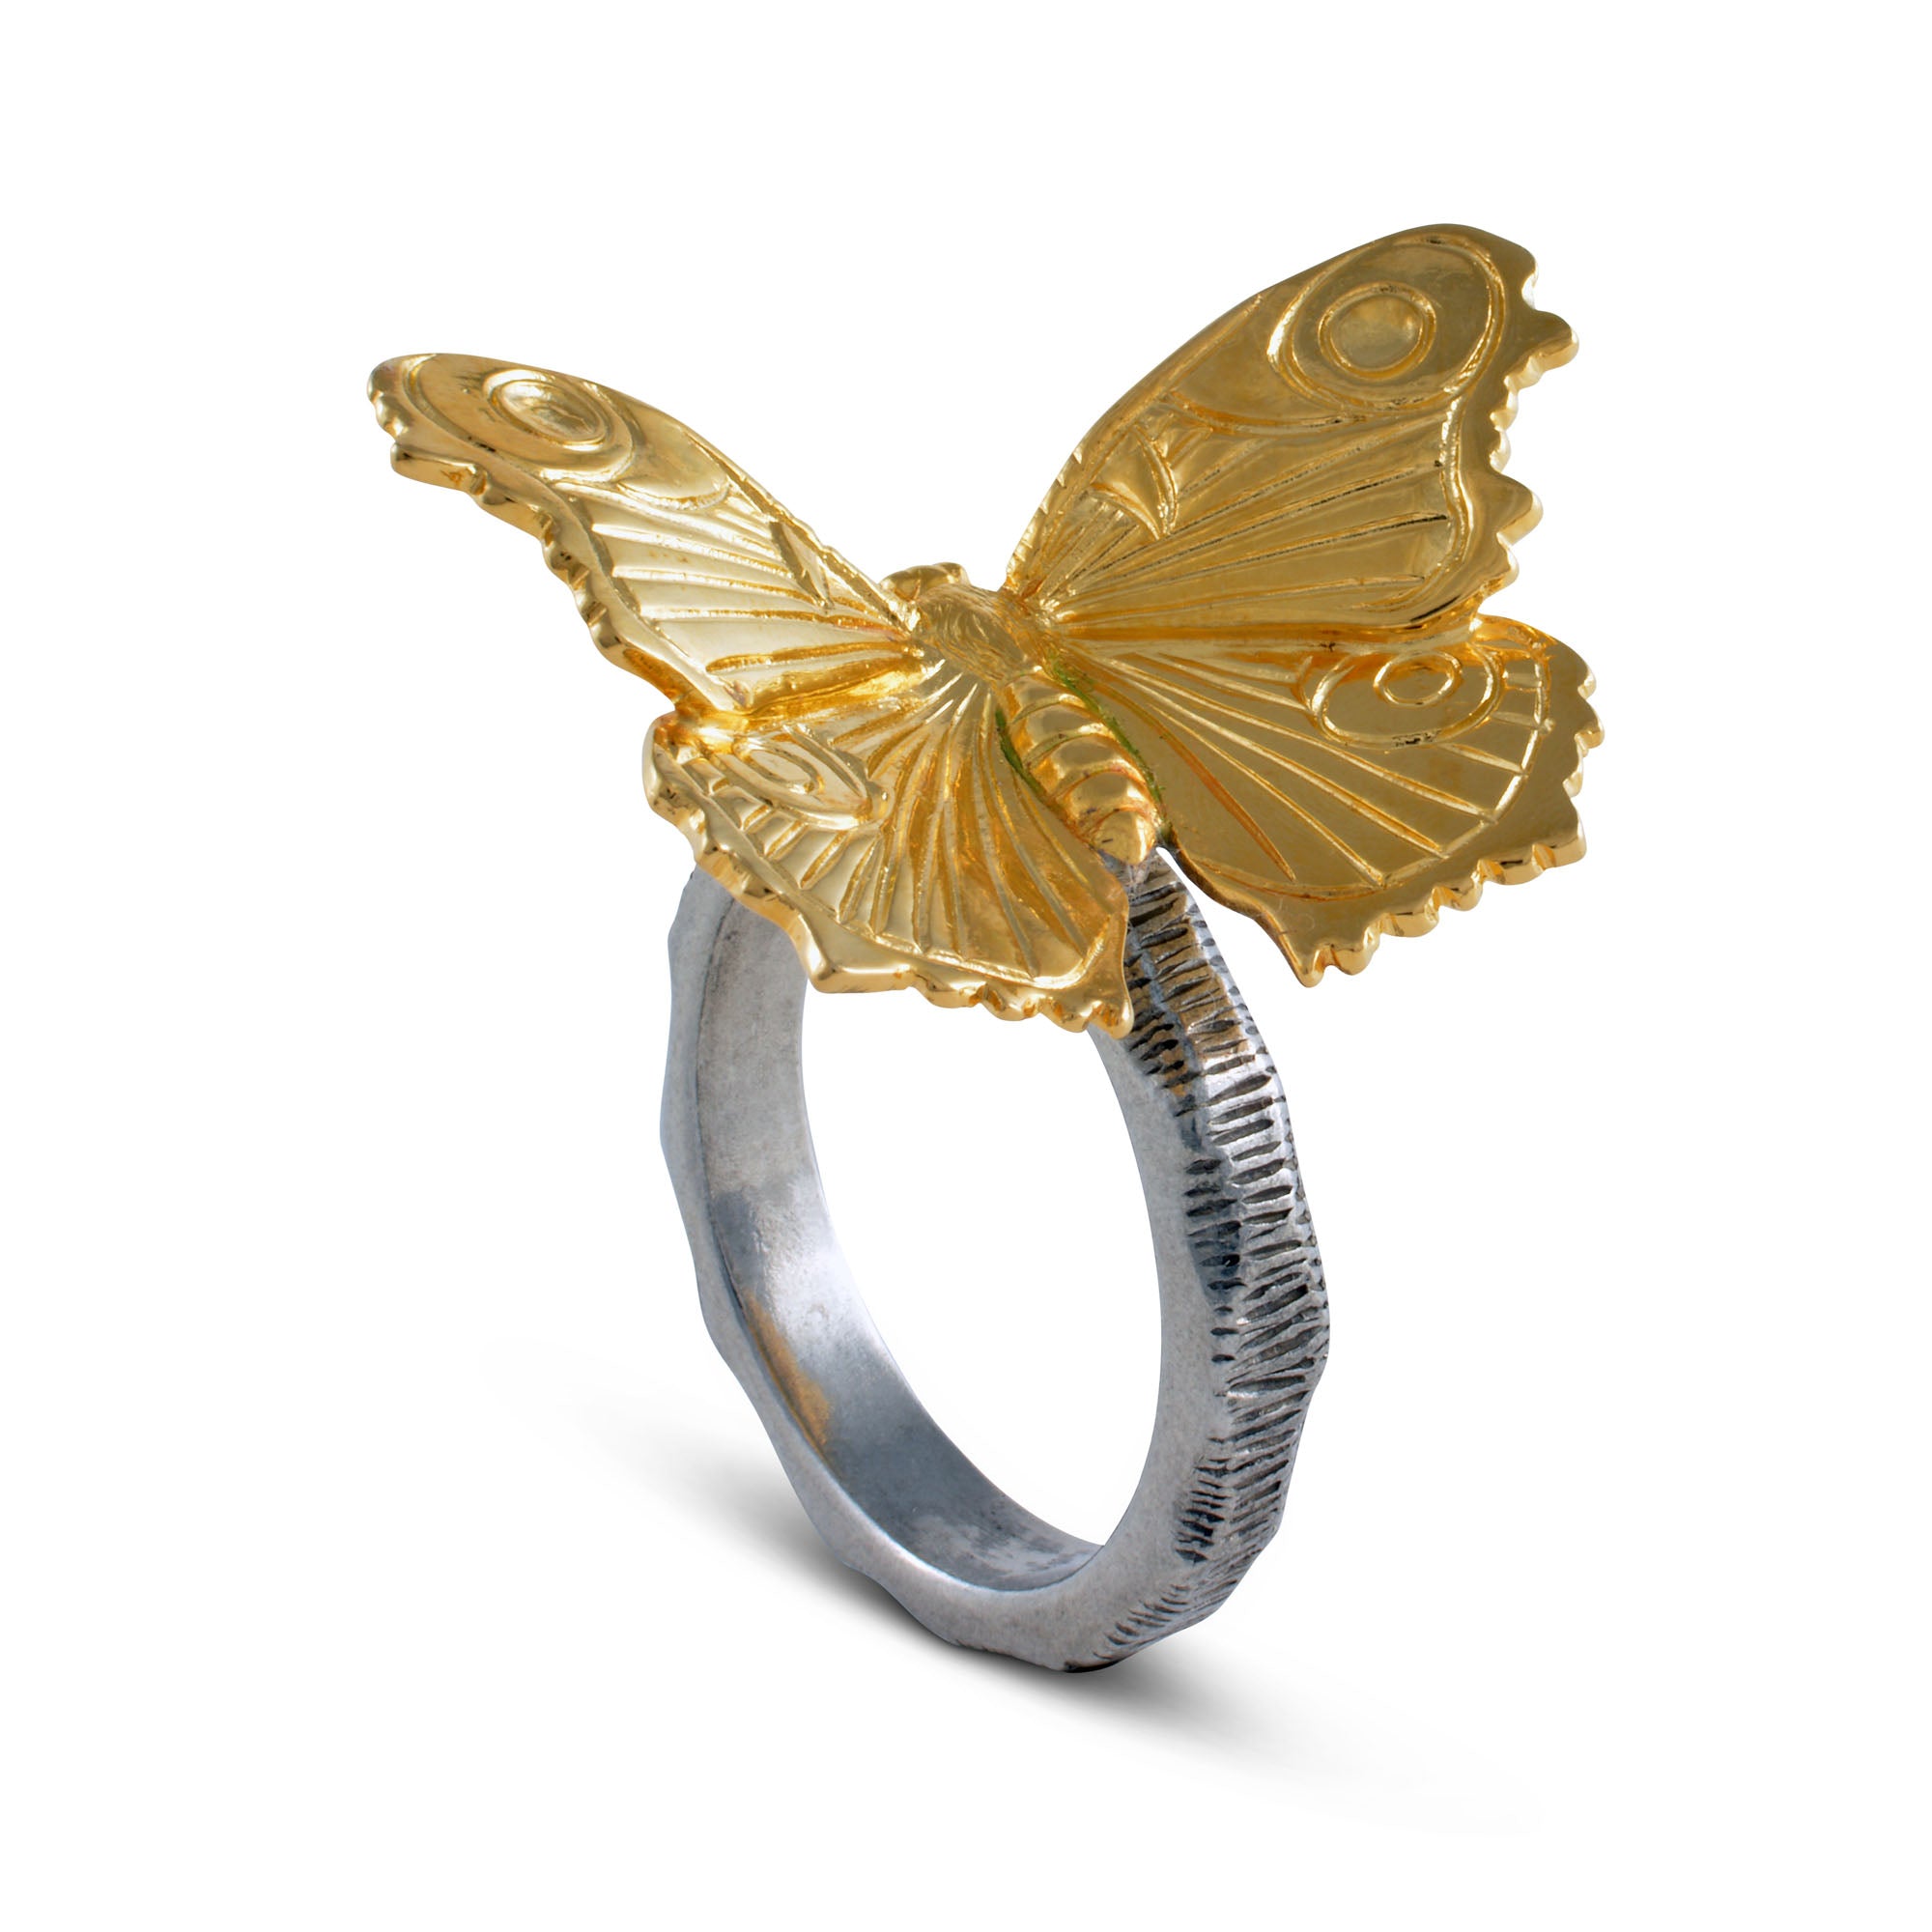 Vagabond House Gold Butterfly Napkin Ring Product Image